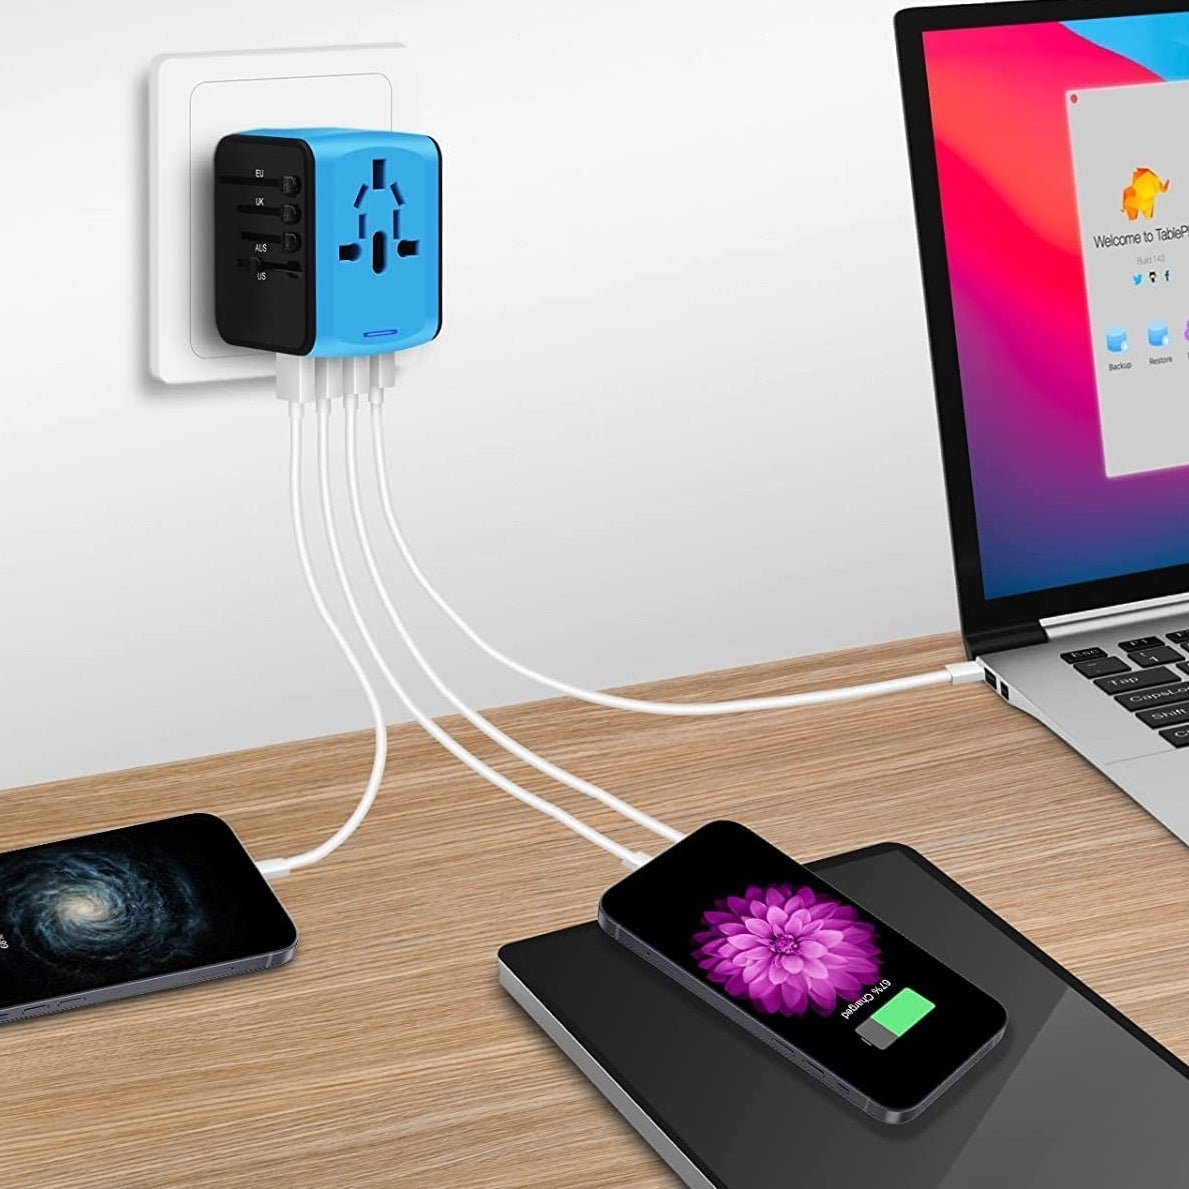 The adapter plugged into the wall and charging multiple devices